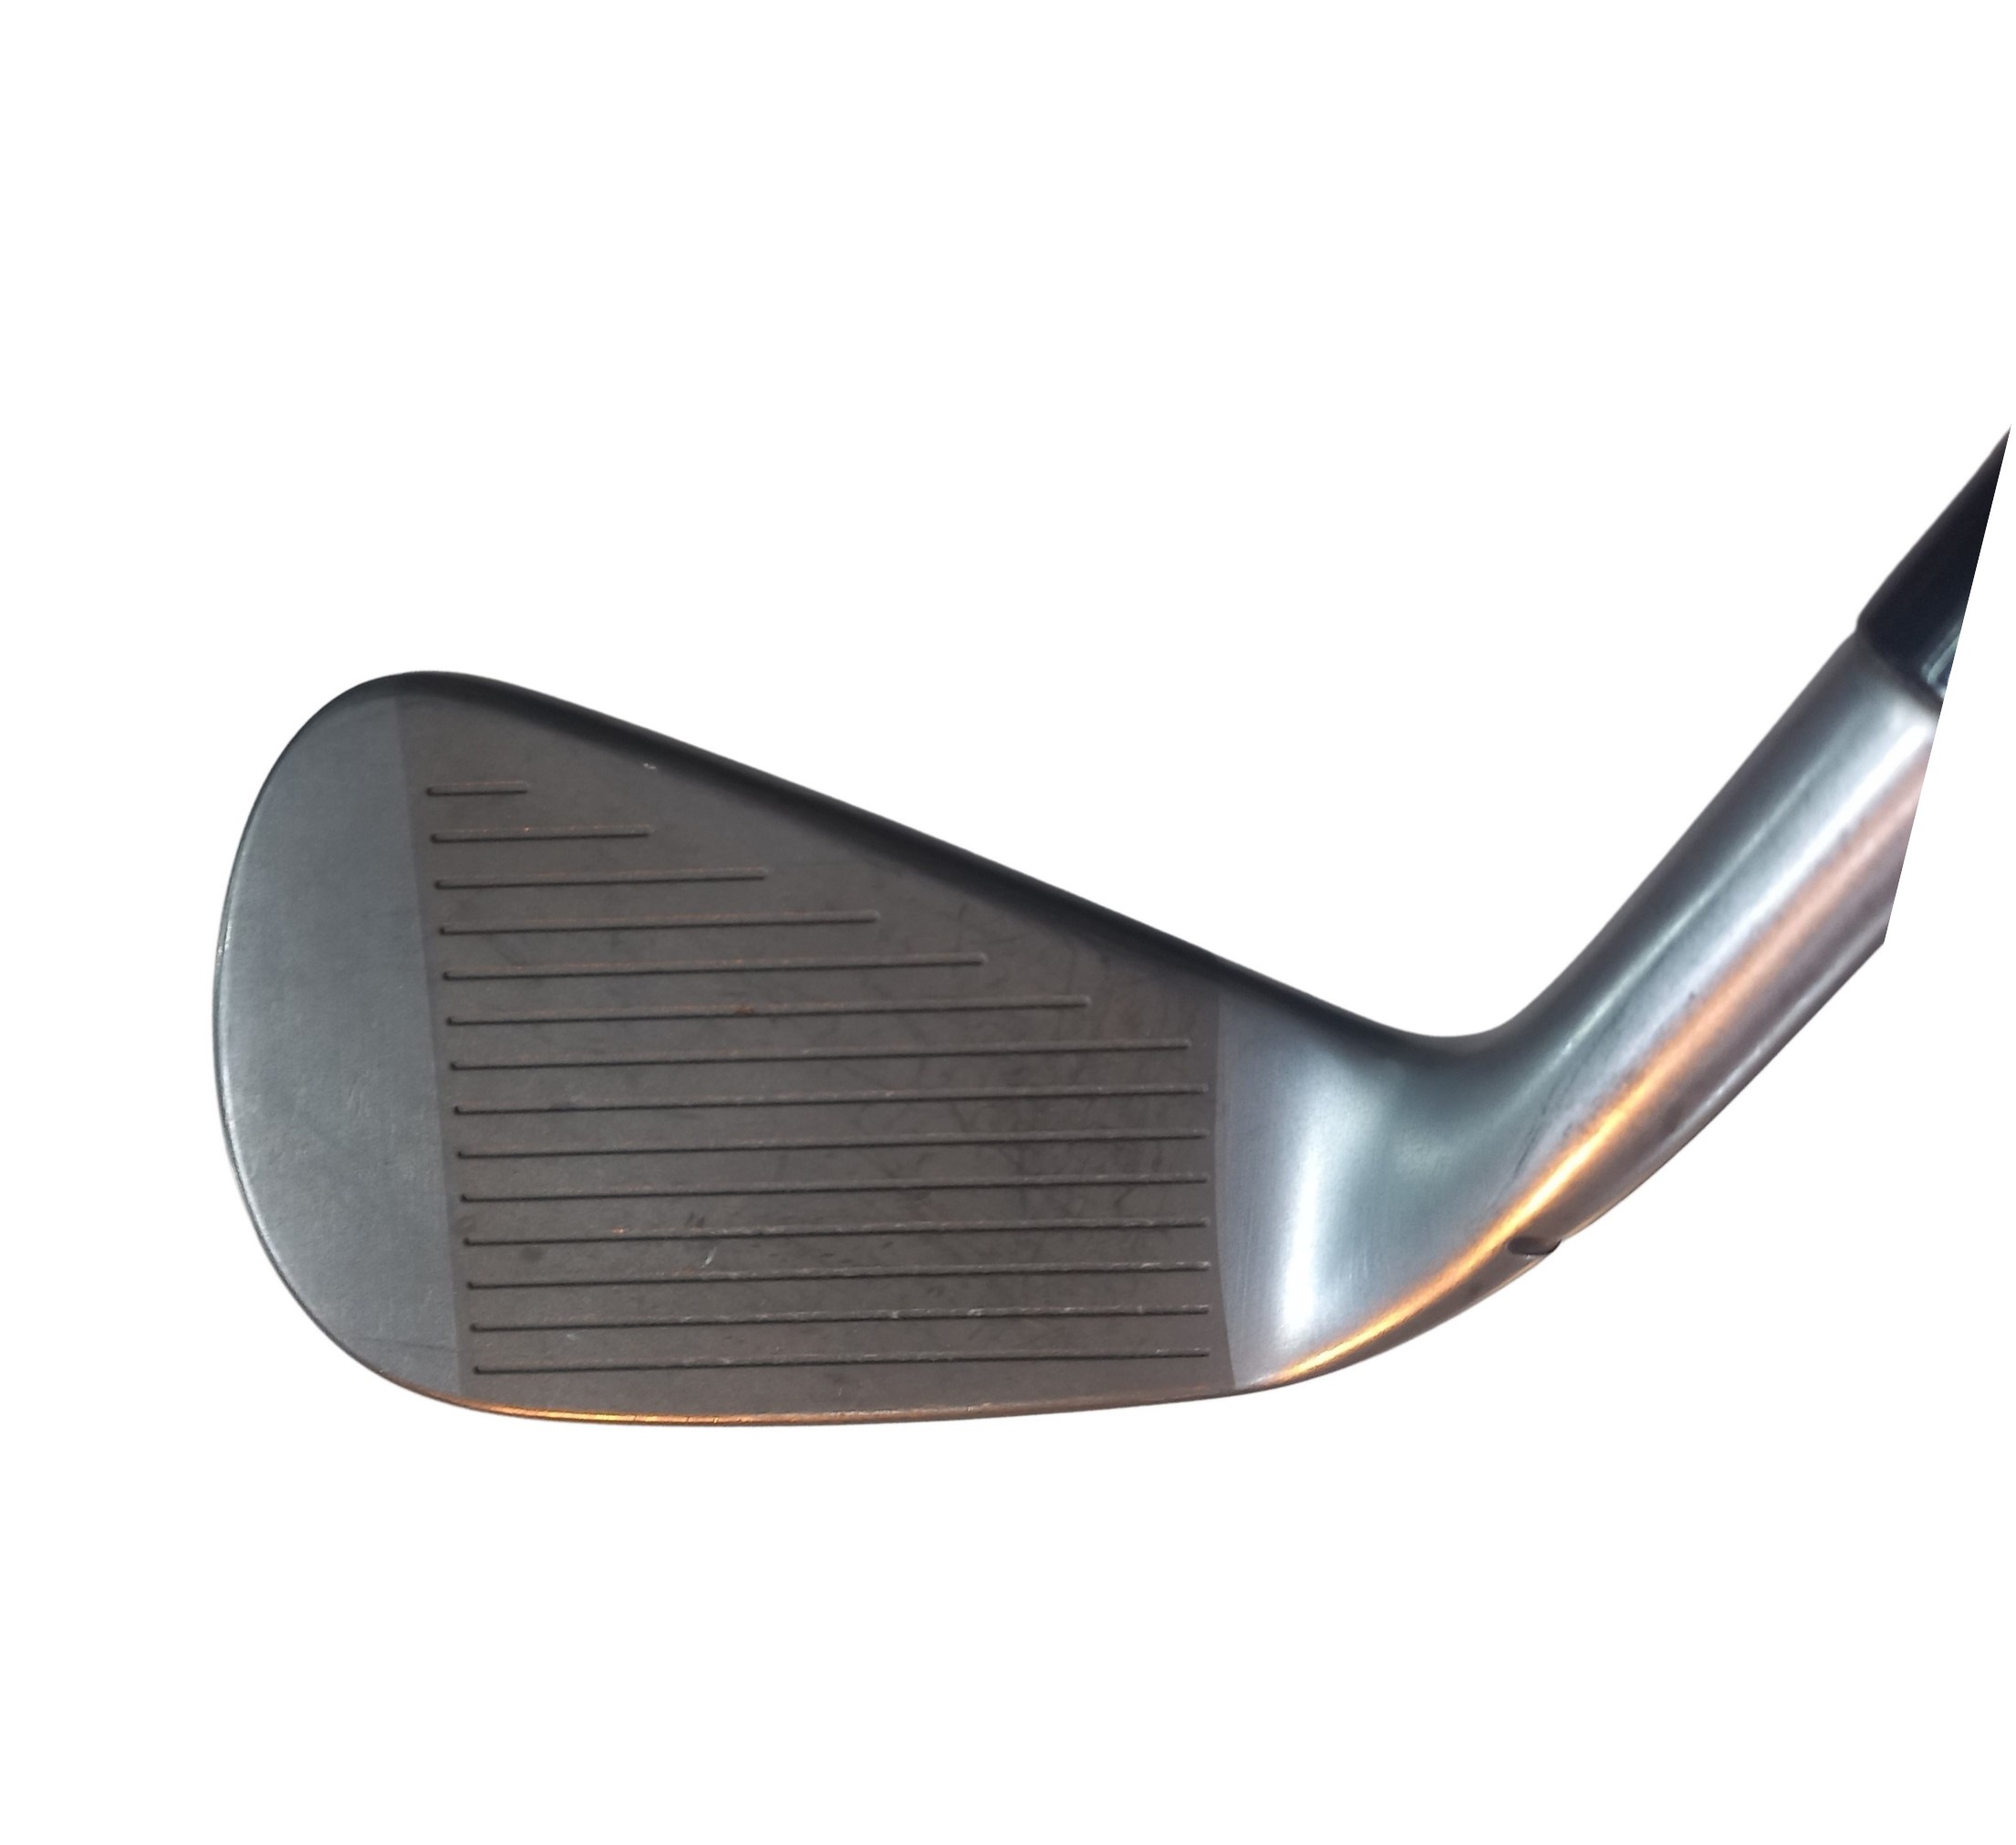 Pre-owned TaylorMade P790 Men's Iron